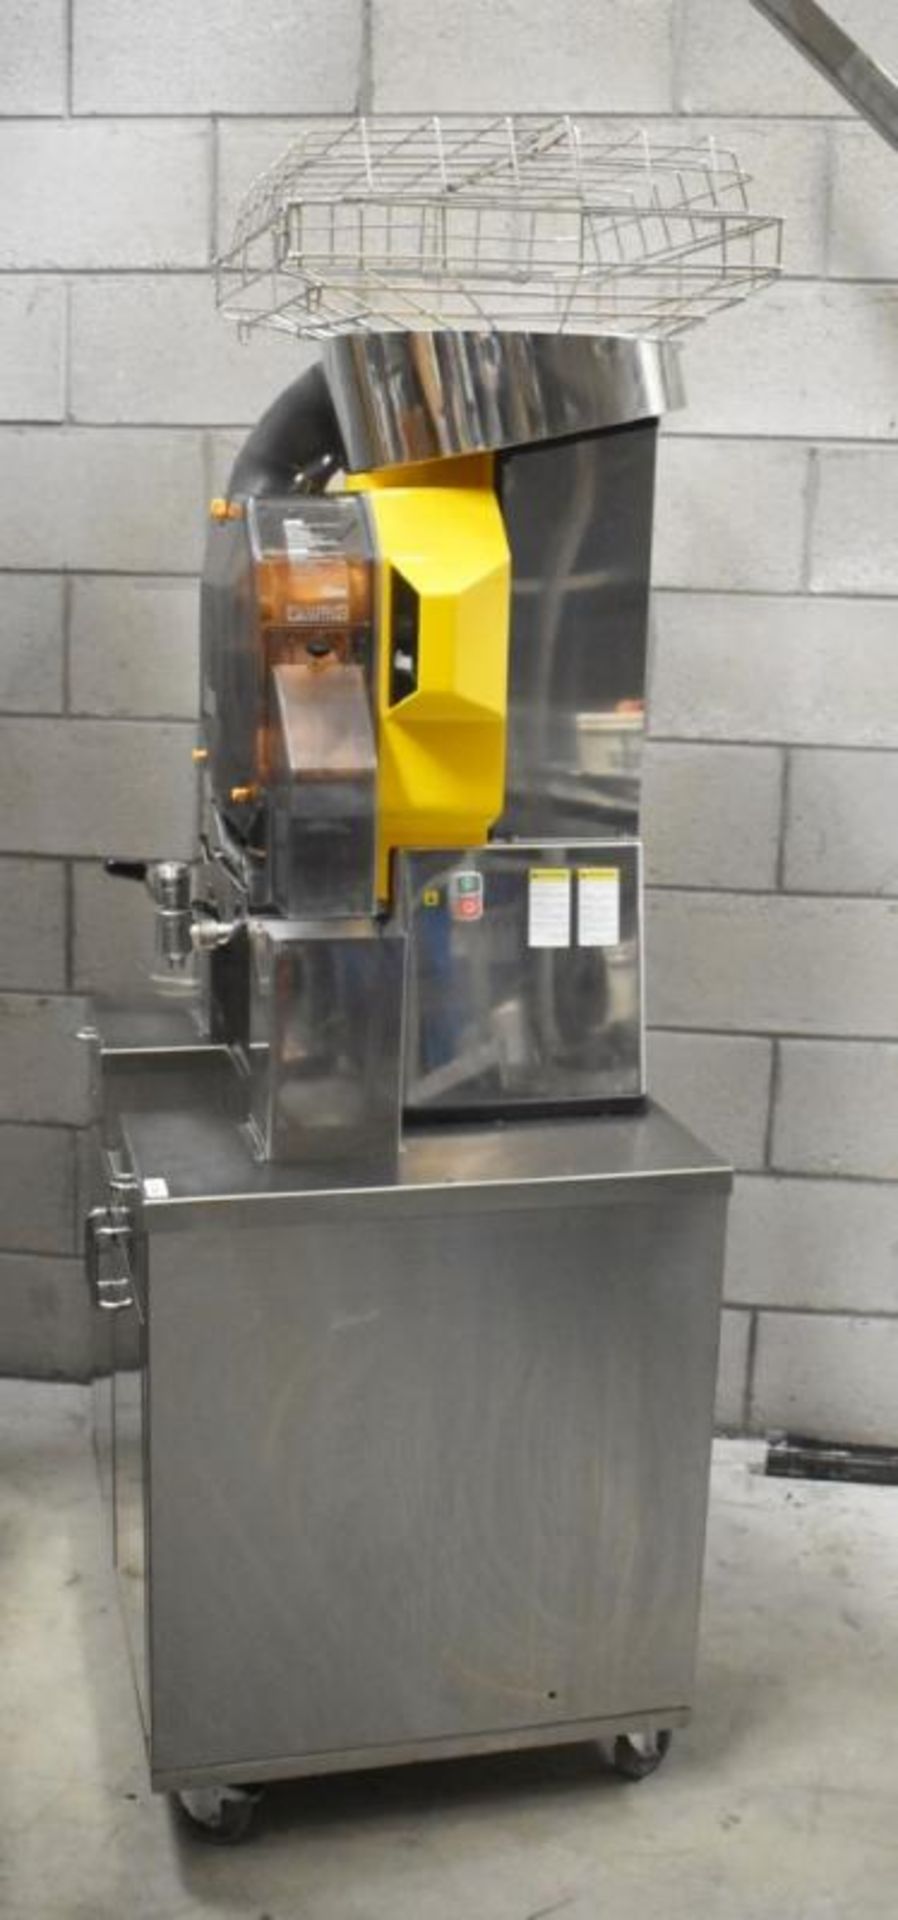 1 x Zumex Speed S +Plus Self-Service Podium Commercial Citrus Juicer - Manufactured in 2018 - Ideal - Image 5 of 21